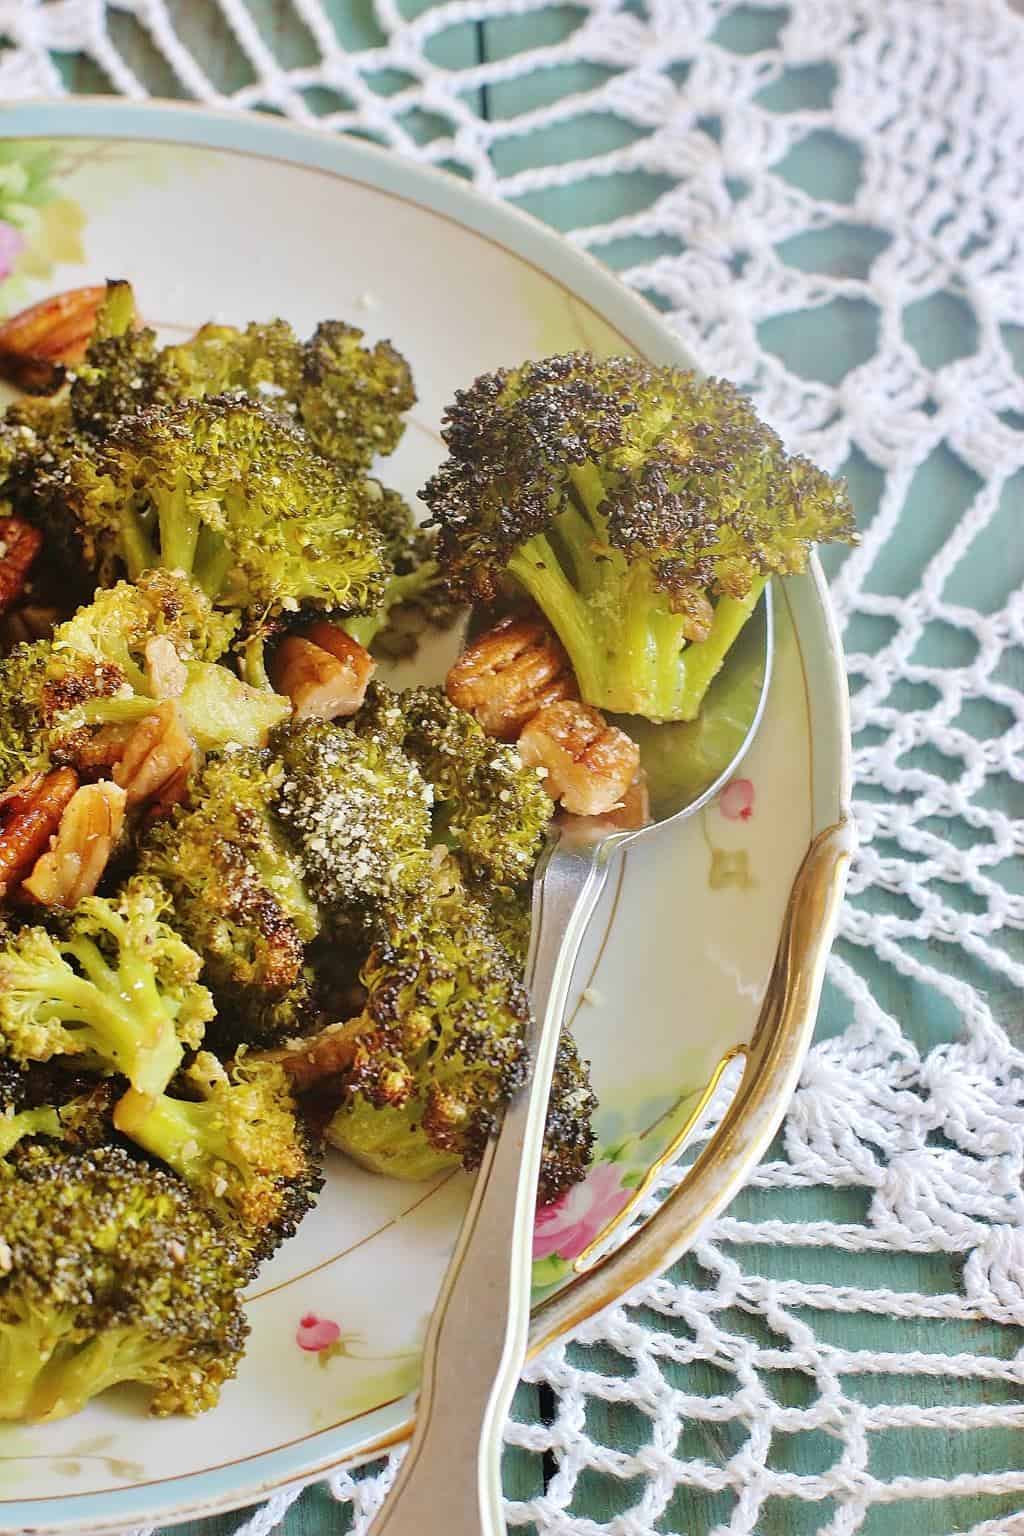 Roasted Broccoli and Pecans. Broccoli florets and pecans tossed in a lemon garlic vinaigrette and roasted till brown. Sprinkle with Parmesan cheese. #syrupandbiscuits #broccoli